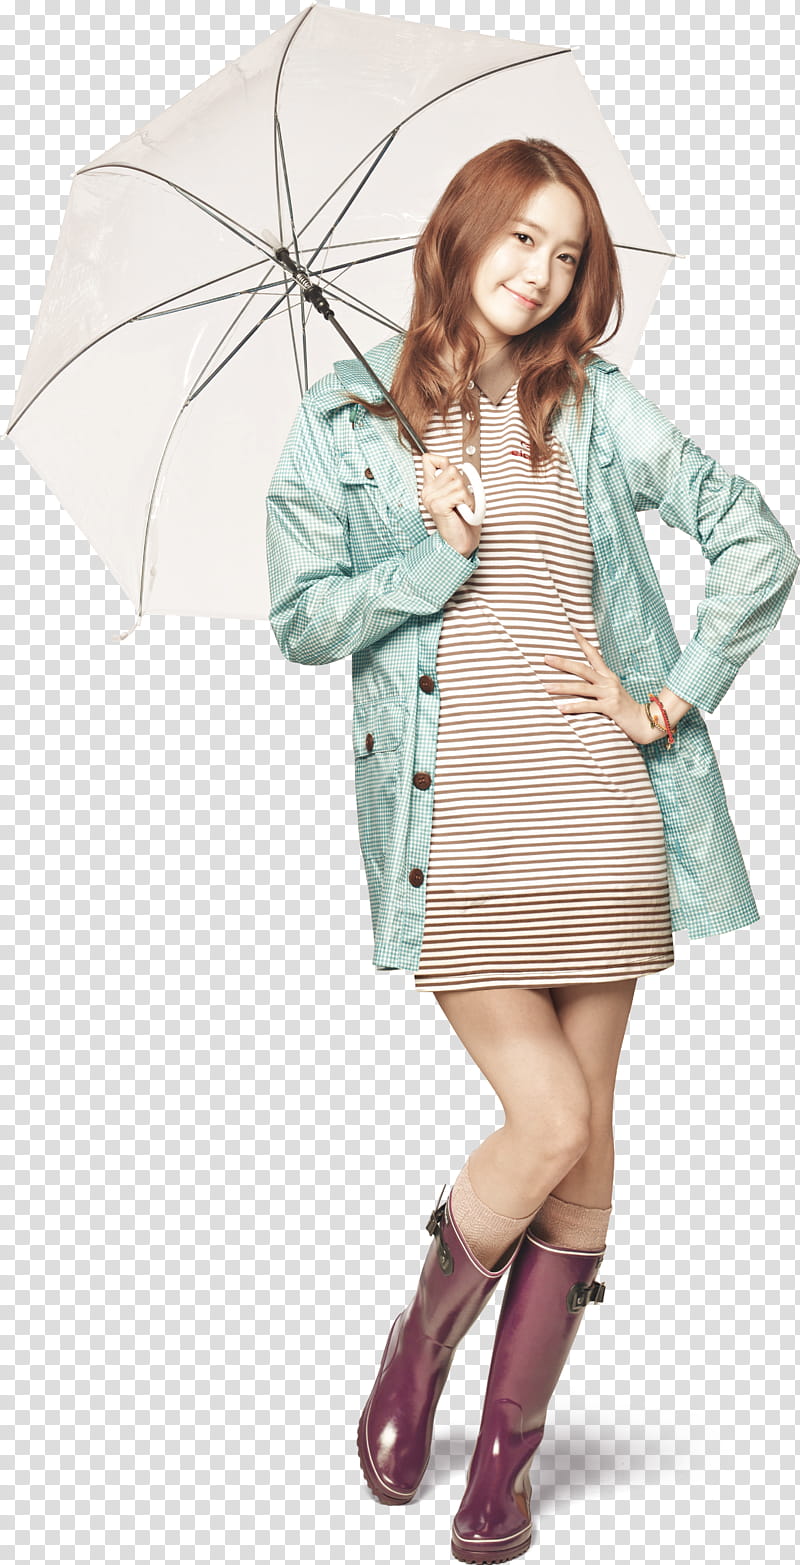 YoonA SNSD Render, woman holding umbrella transparent background PNG clipart